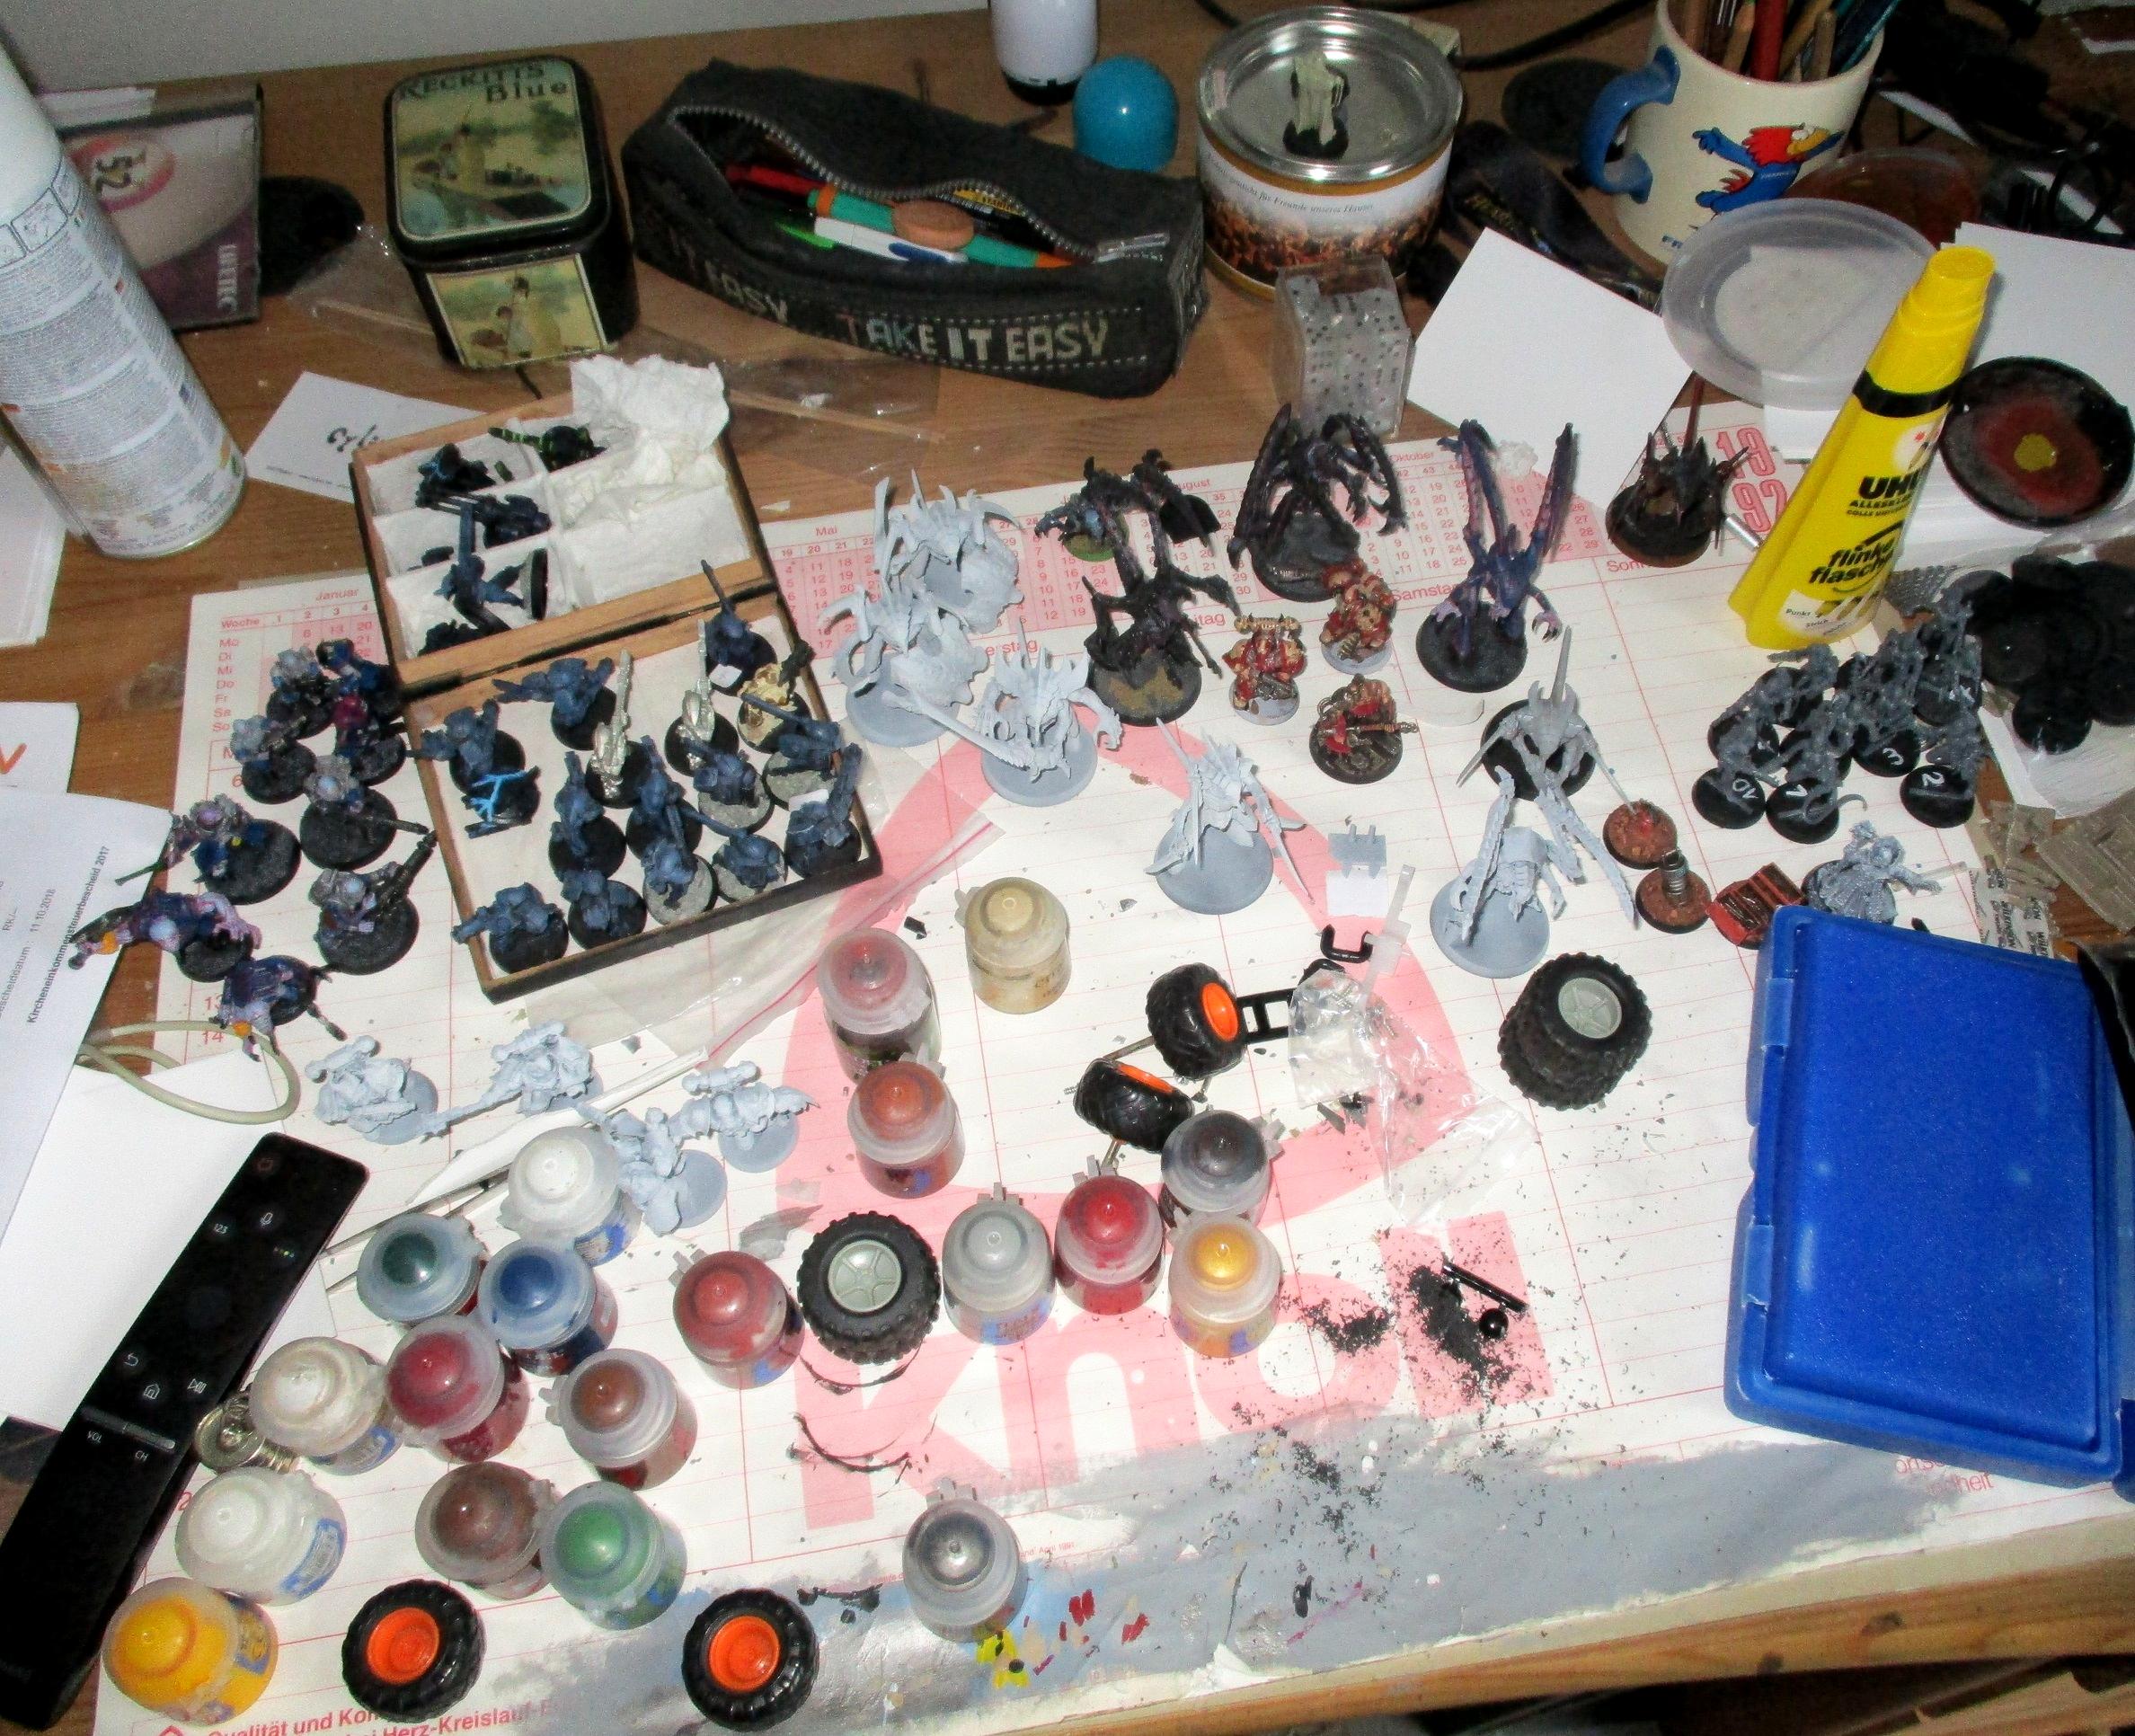 Confessions of a wargaming horder